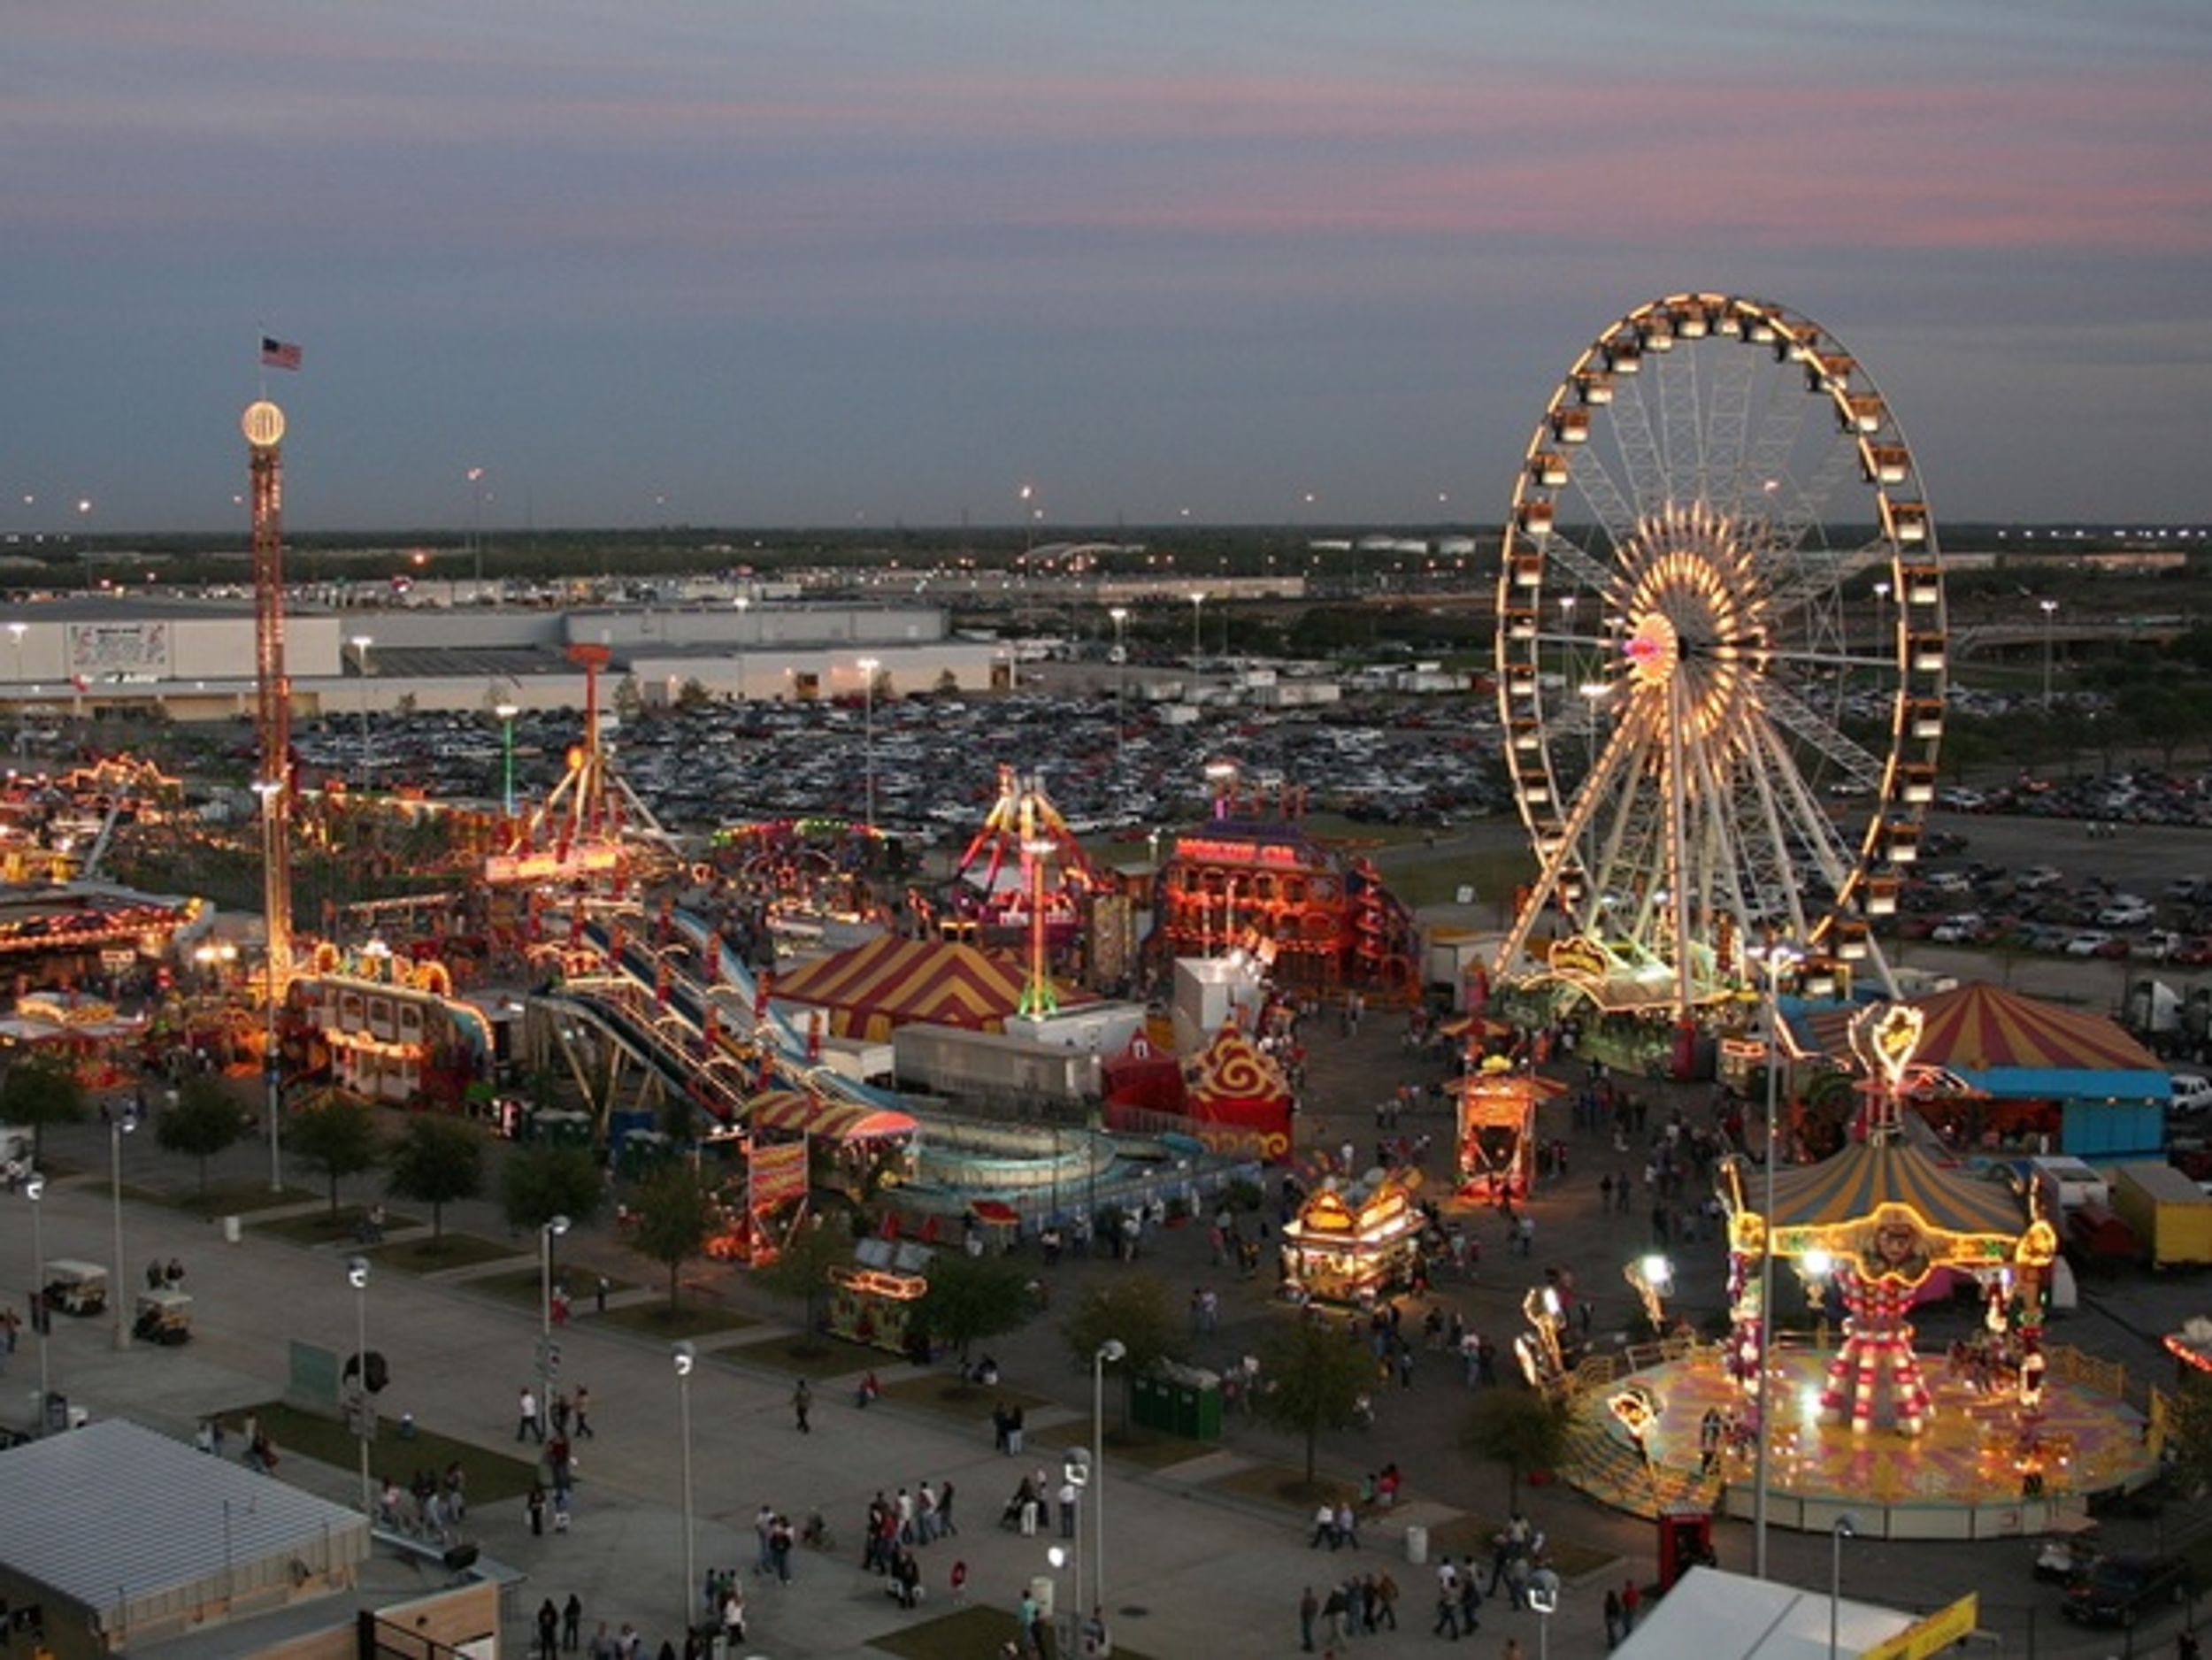 10 Reasons To Go To The Texas Rodeo